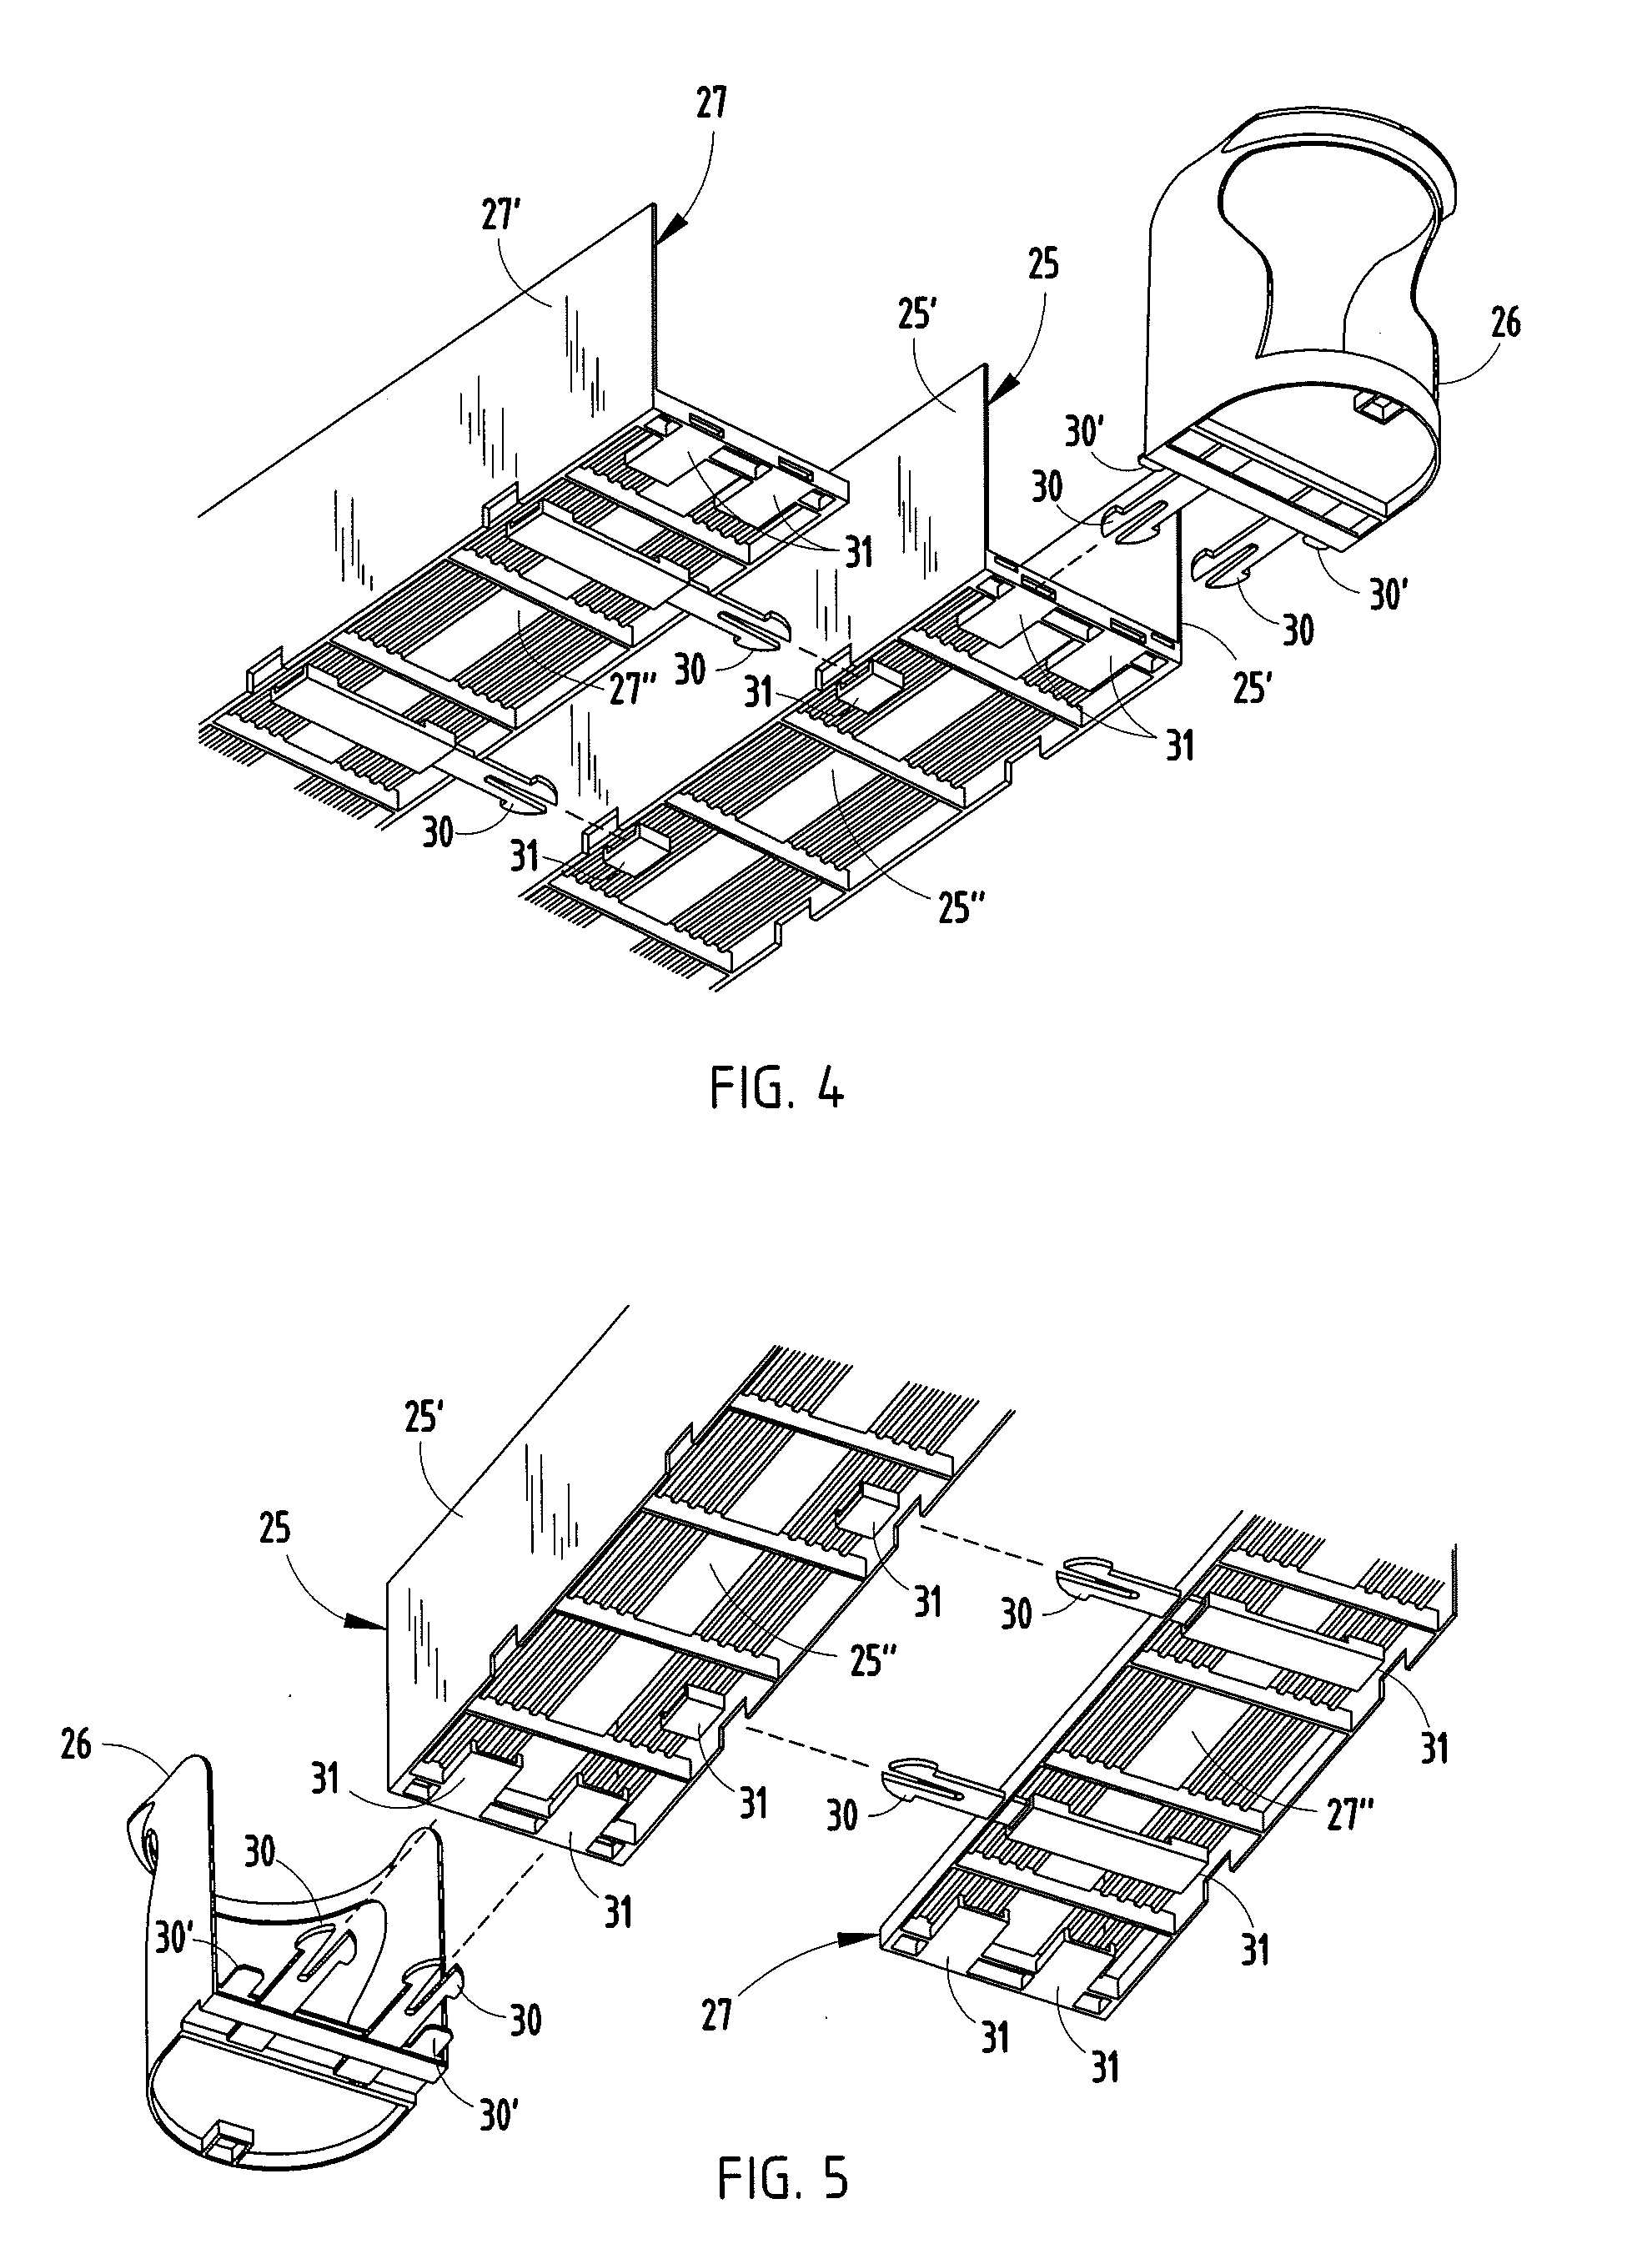 Display channel apparatus